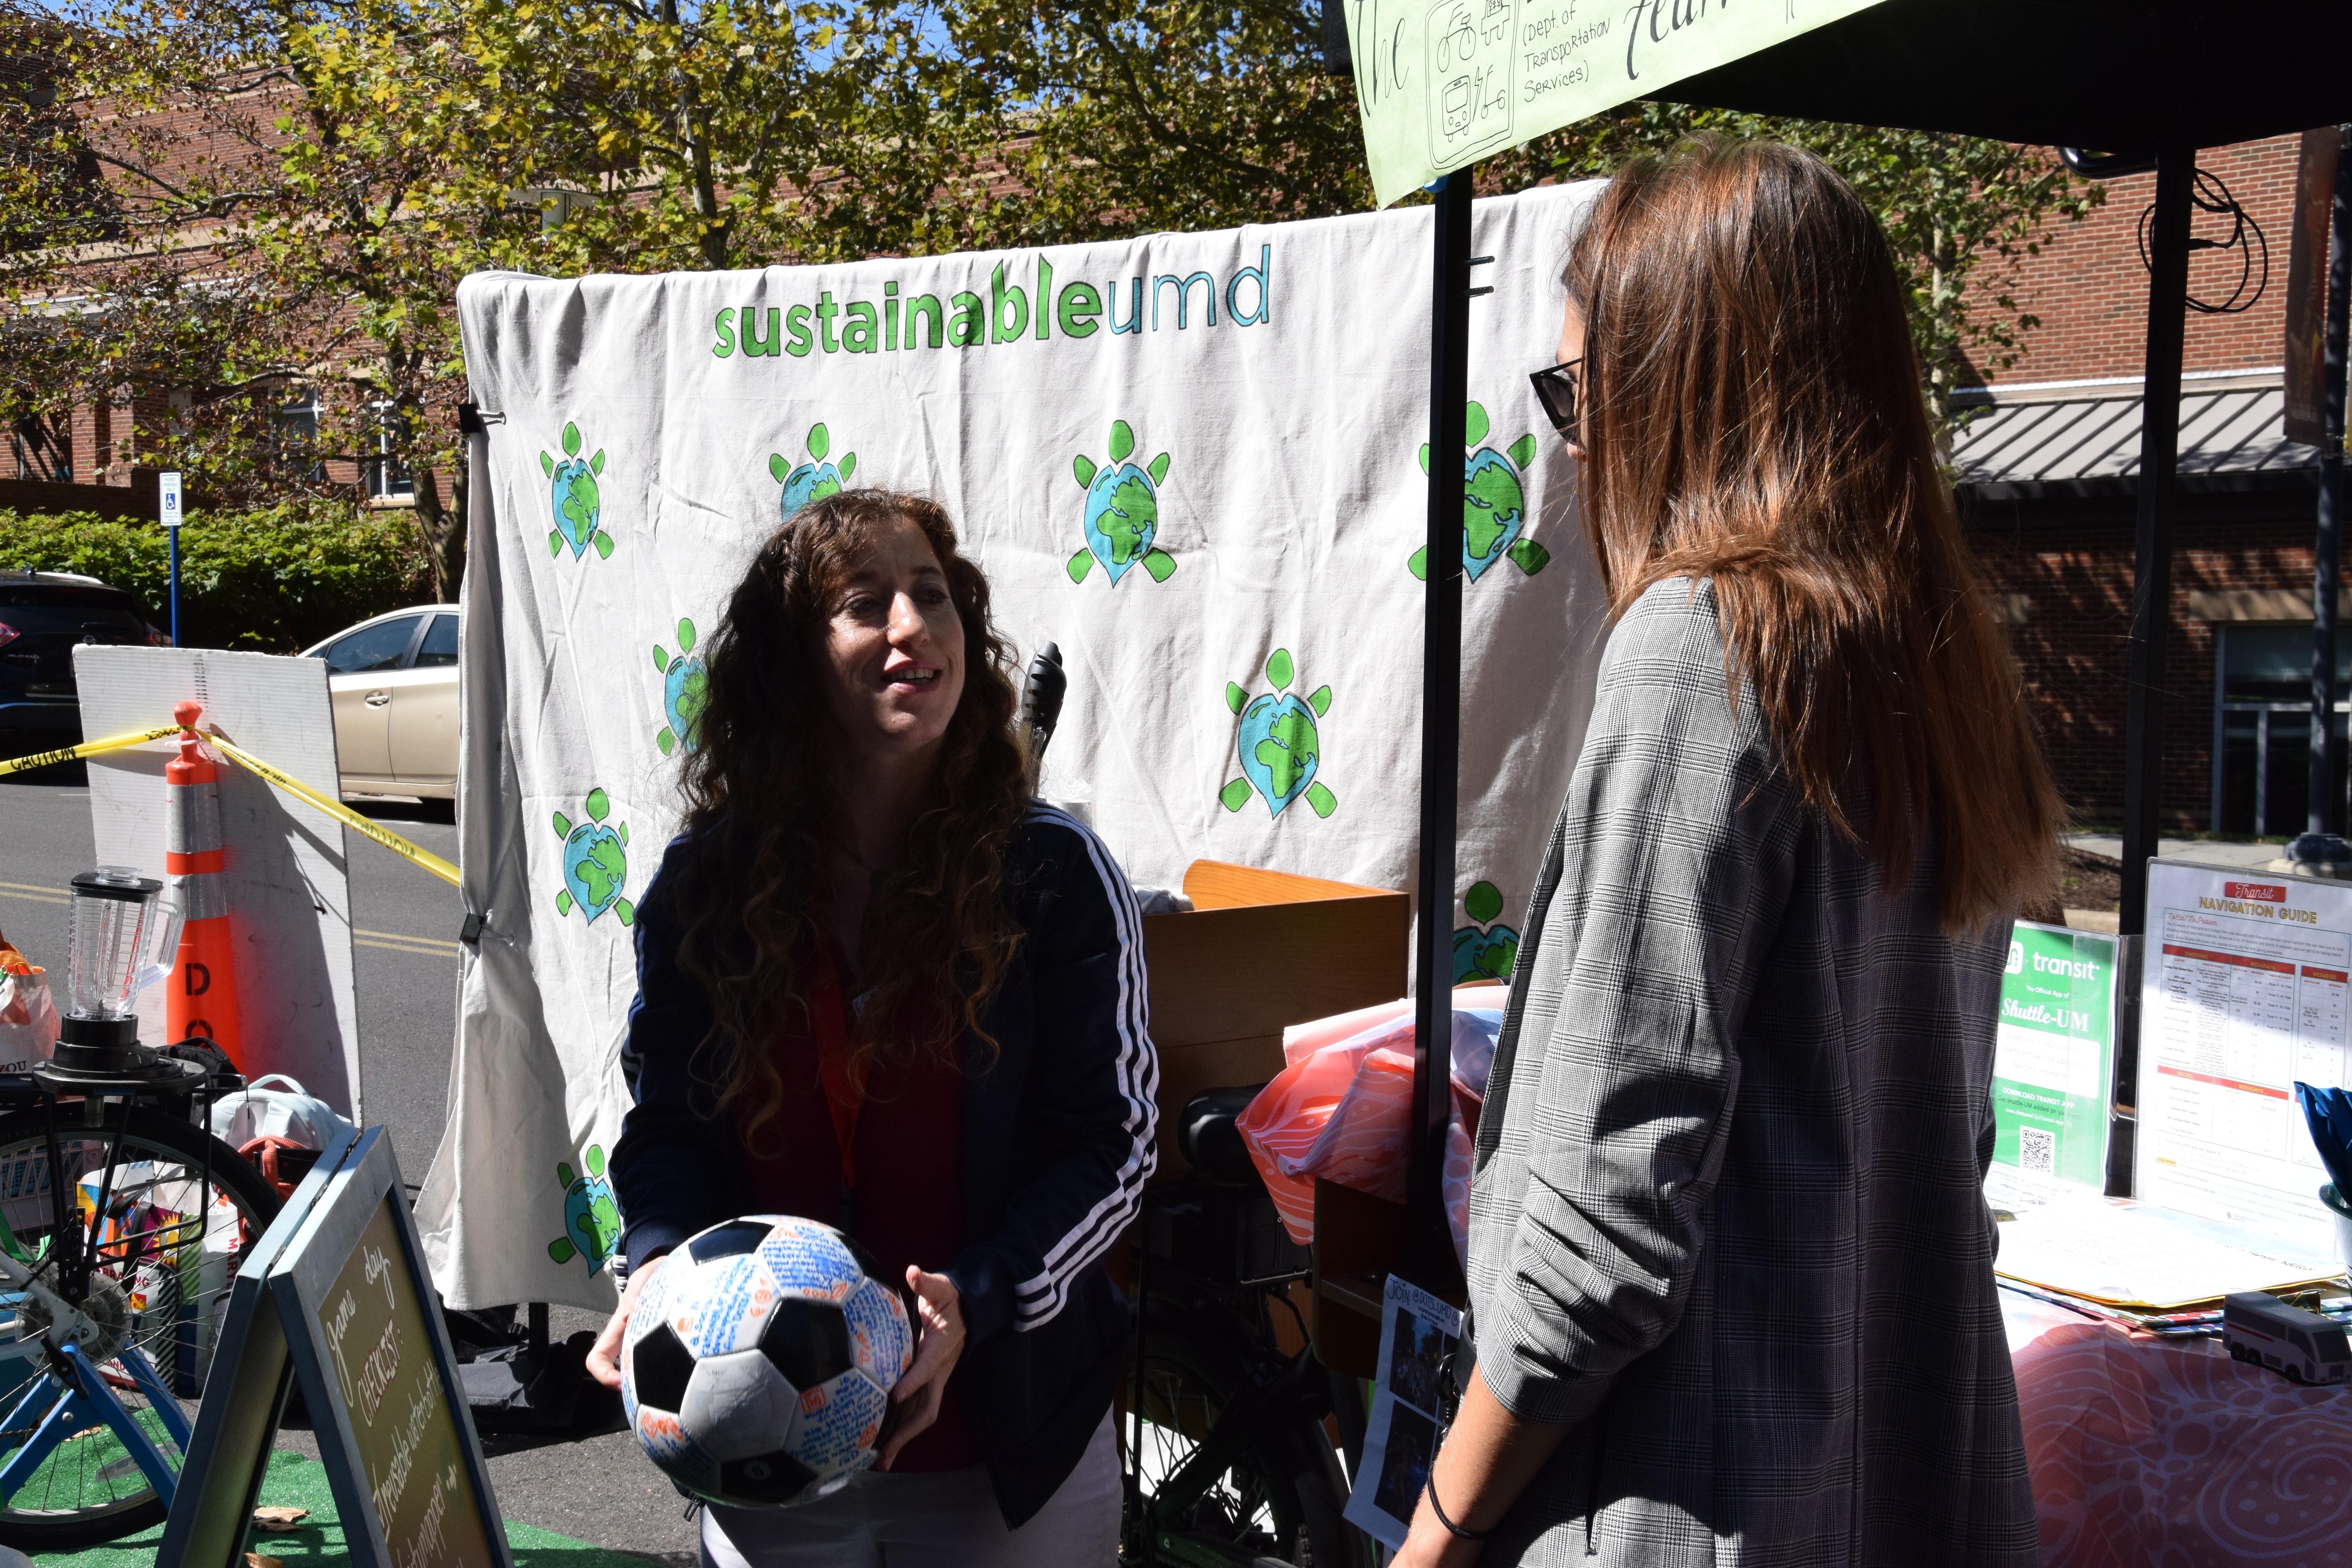 Conversations and activities at Parking Day